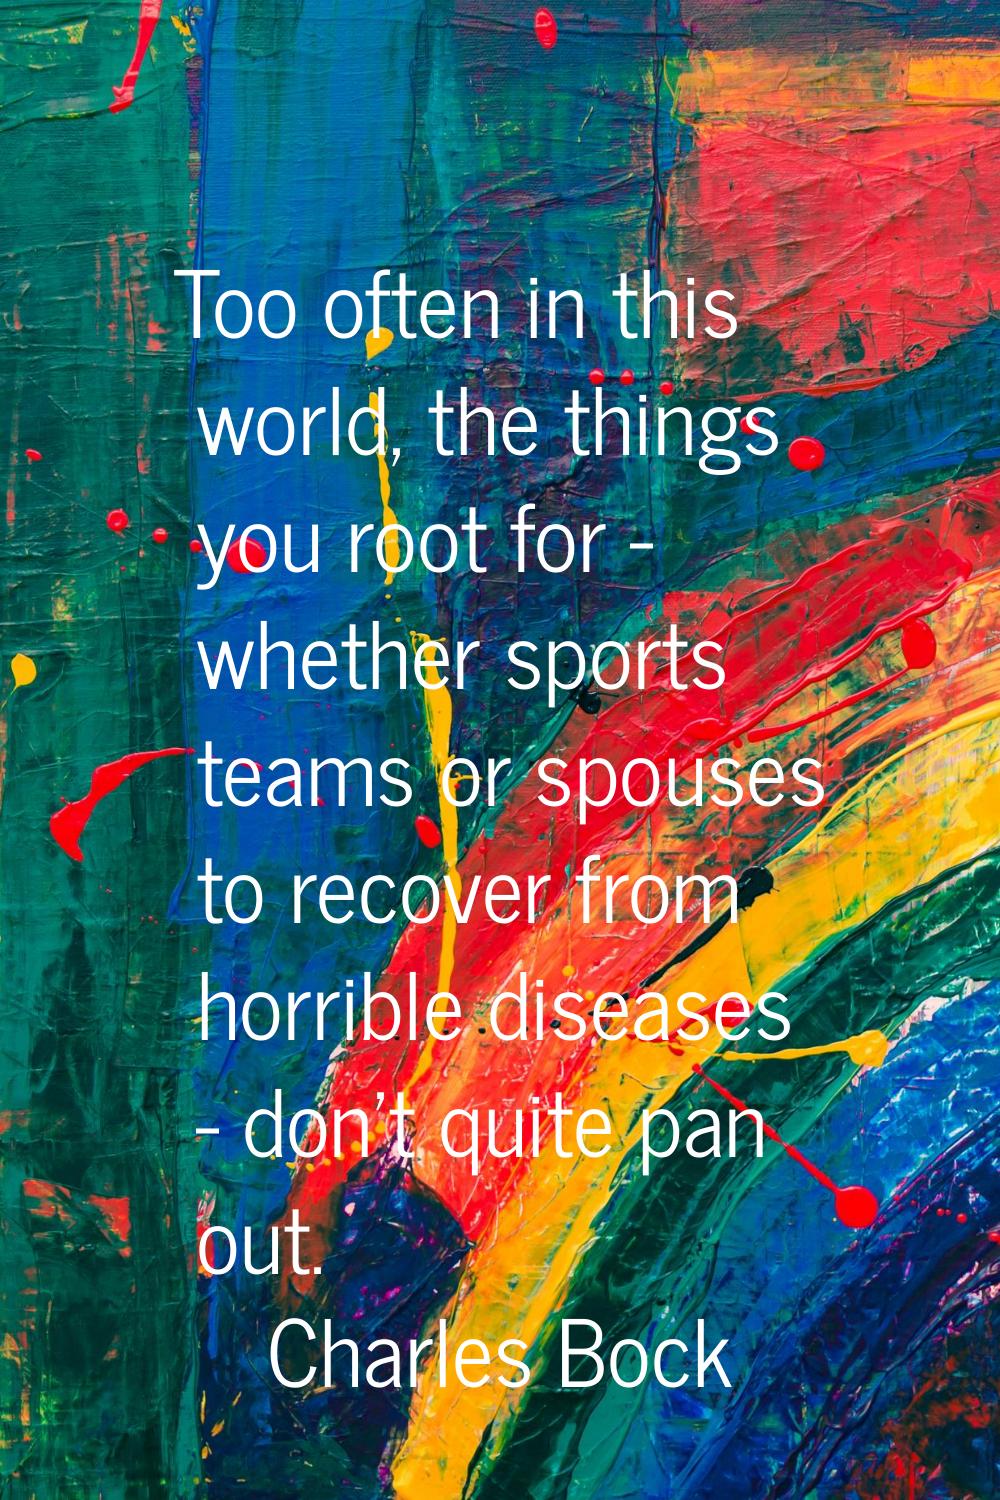 Too often in this world, the things you root for - whether sports teams or spouses to recover from 